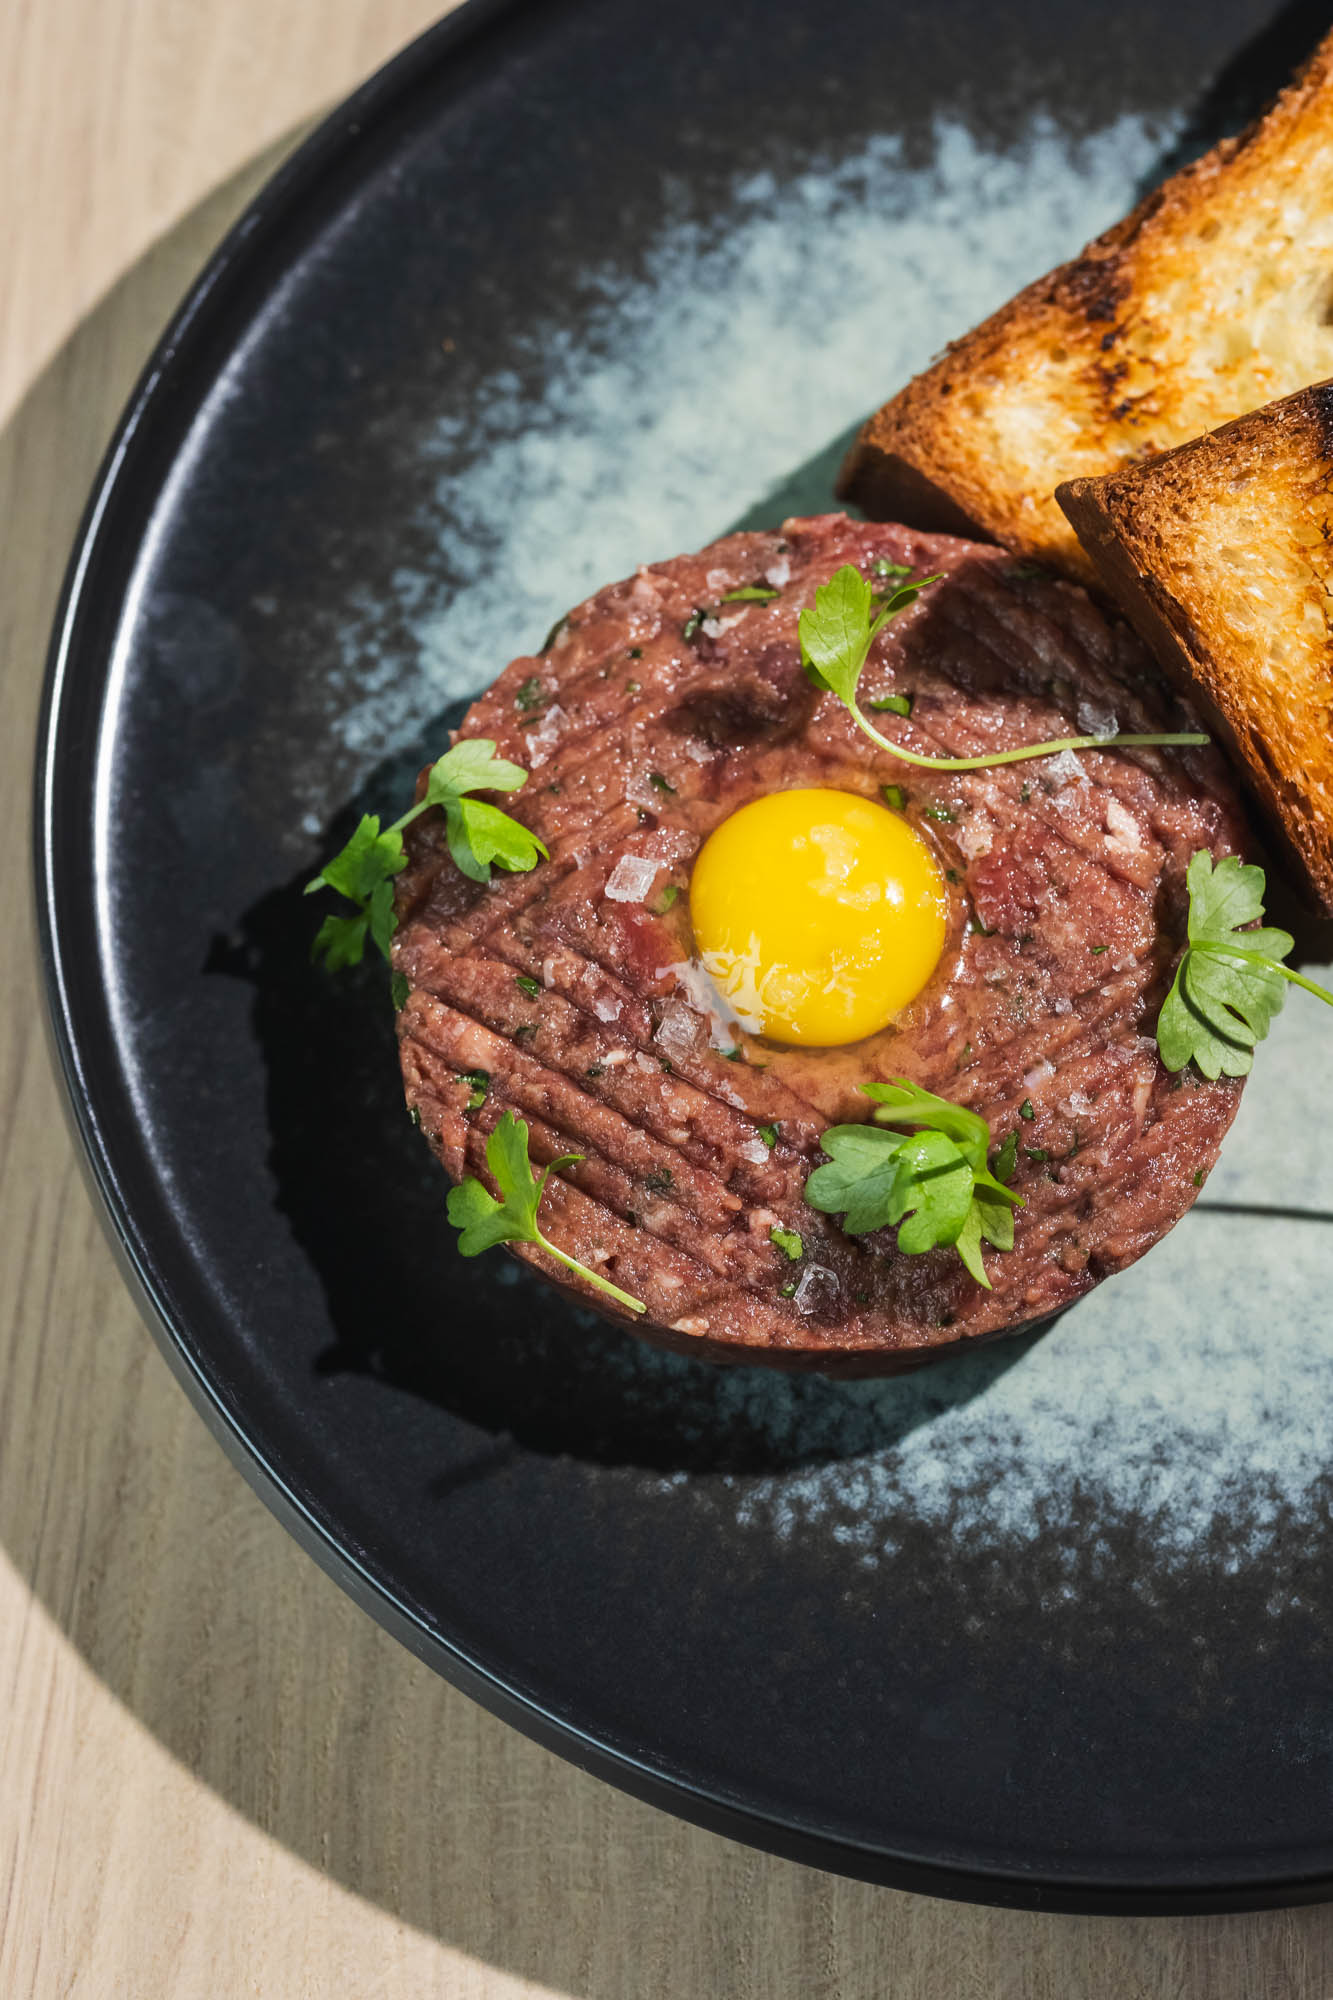 Beef Tartare, served with brioche and a quail egg